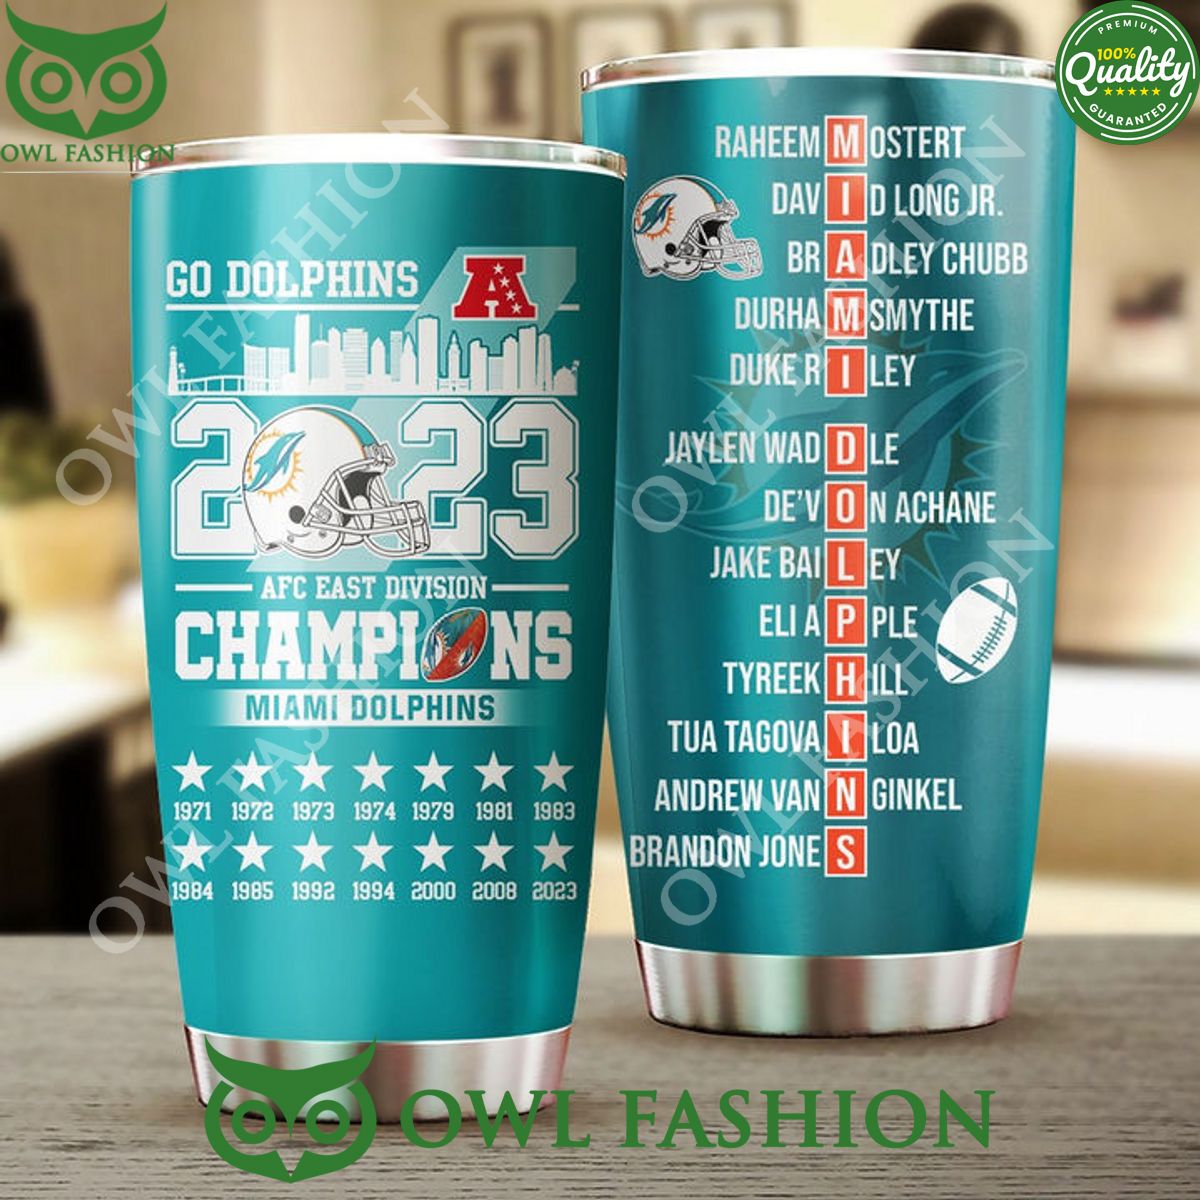 miami dolphins afc east division champions tumbler cup 2023 1 Ocvyp.jpg